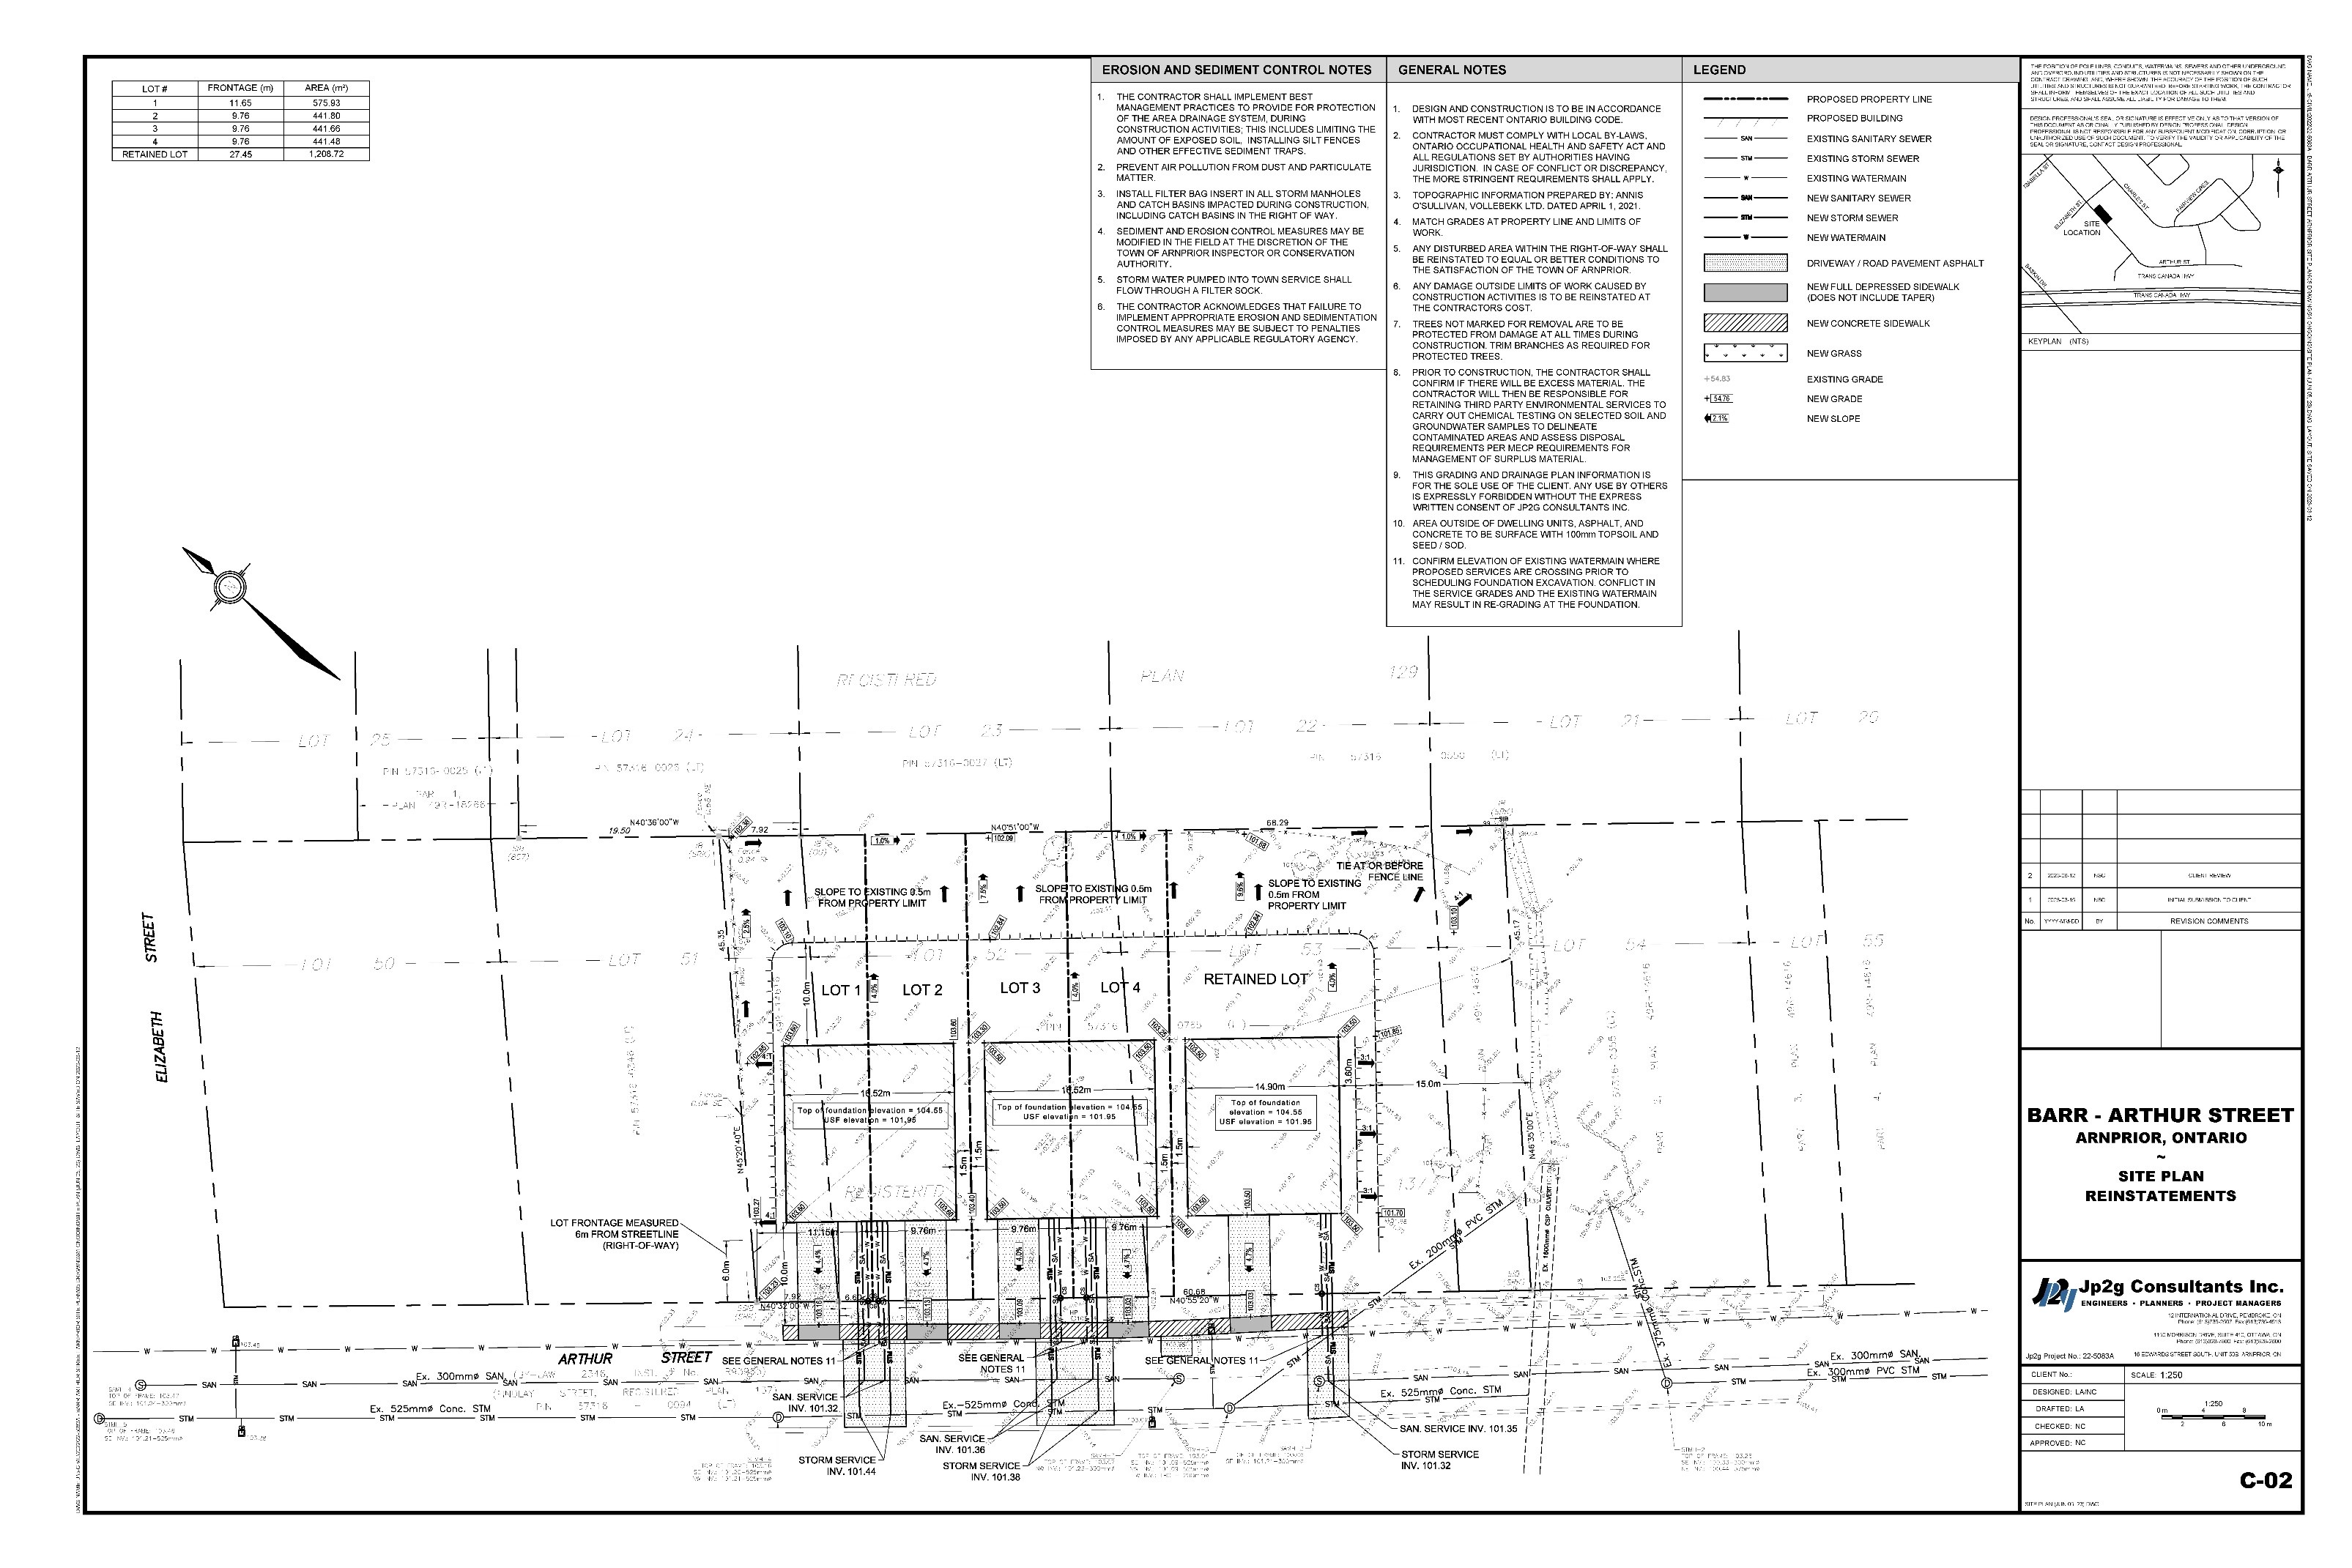 Site plan showing the desired site layout